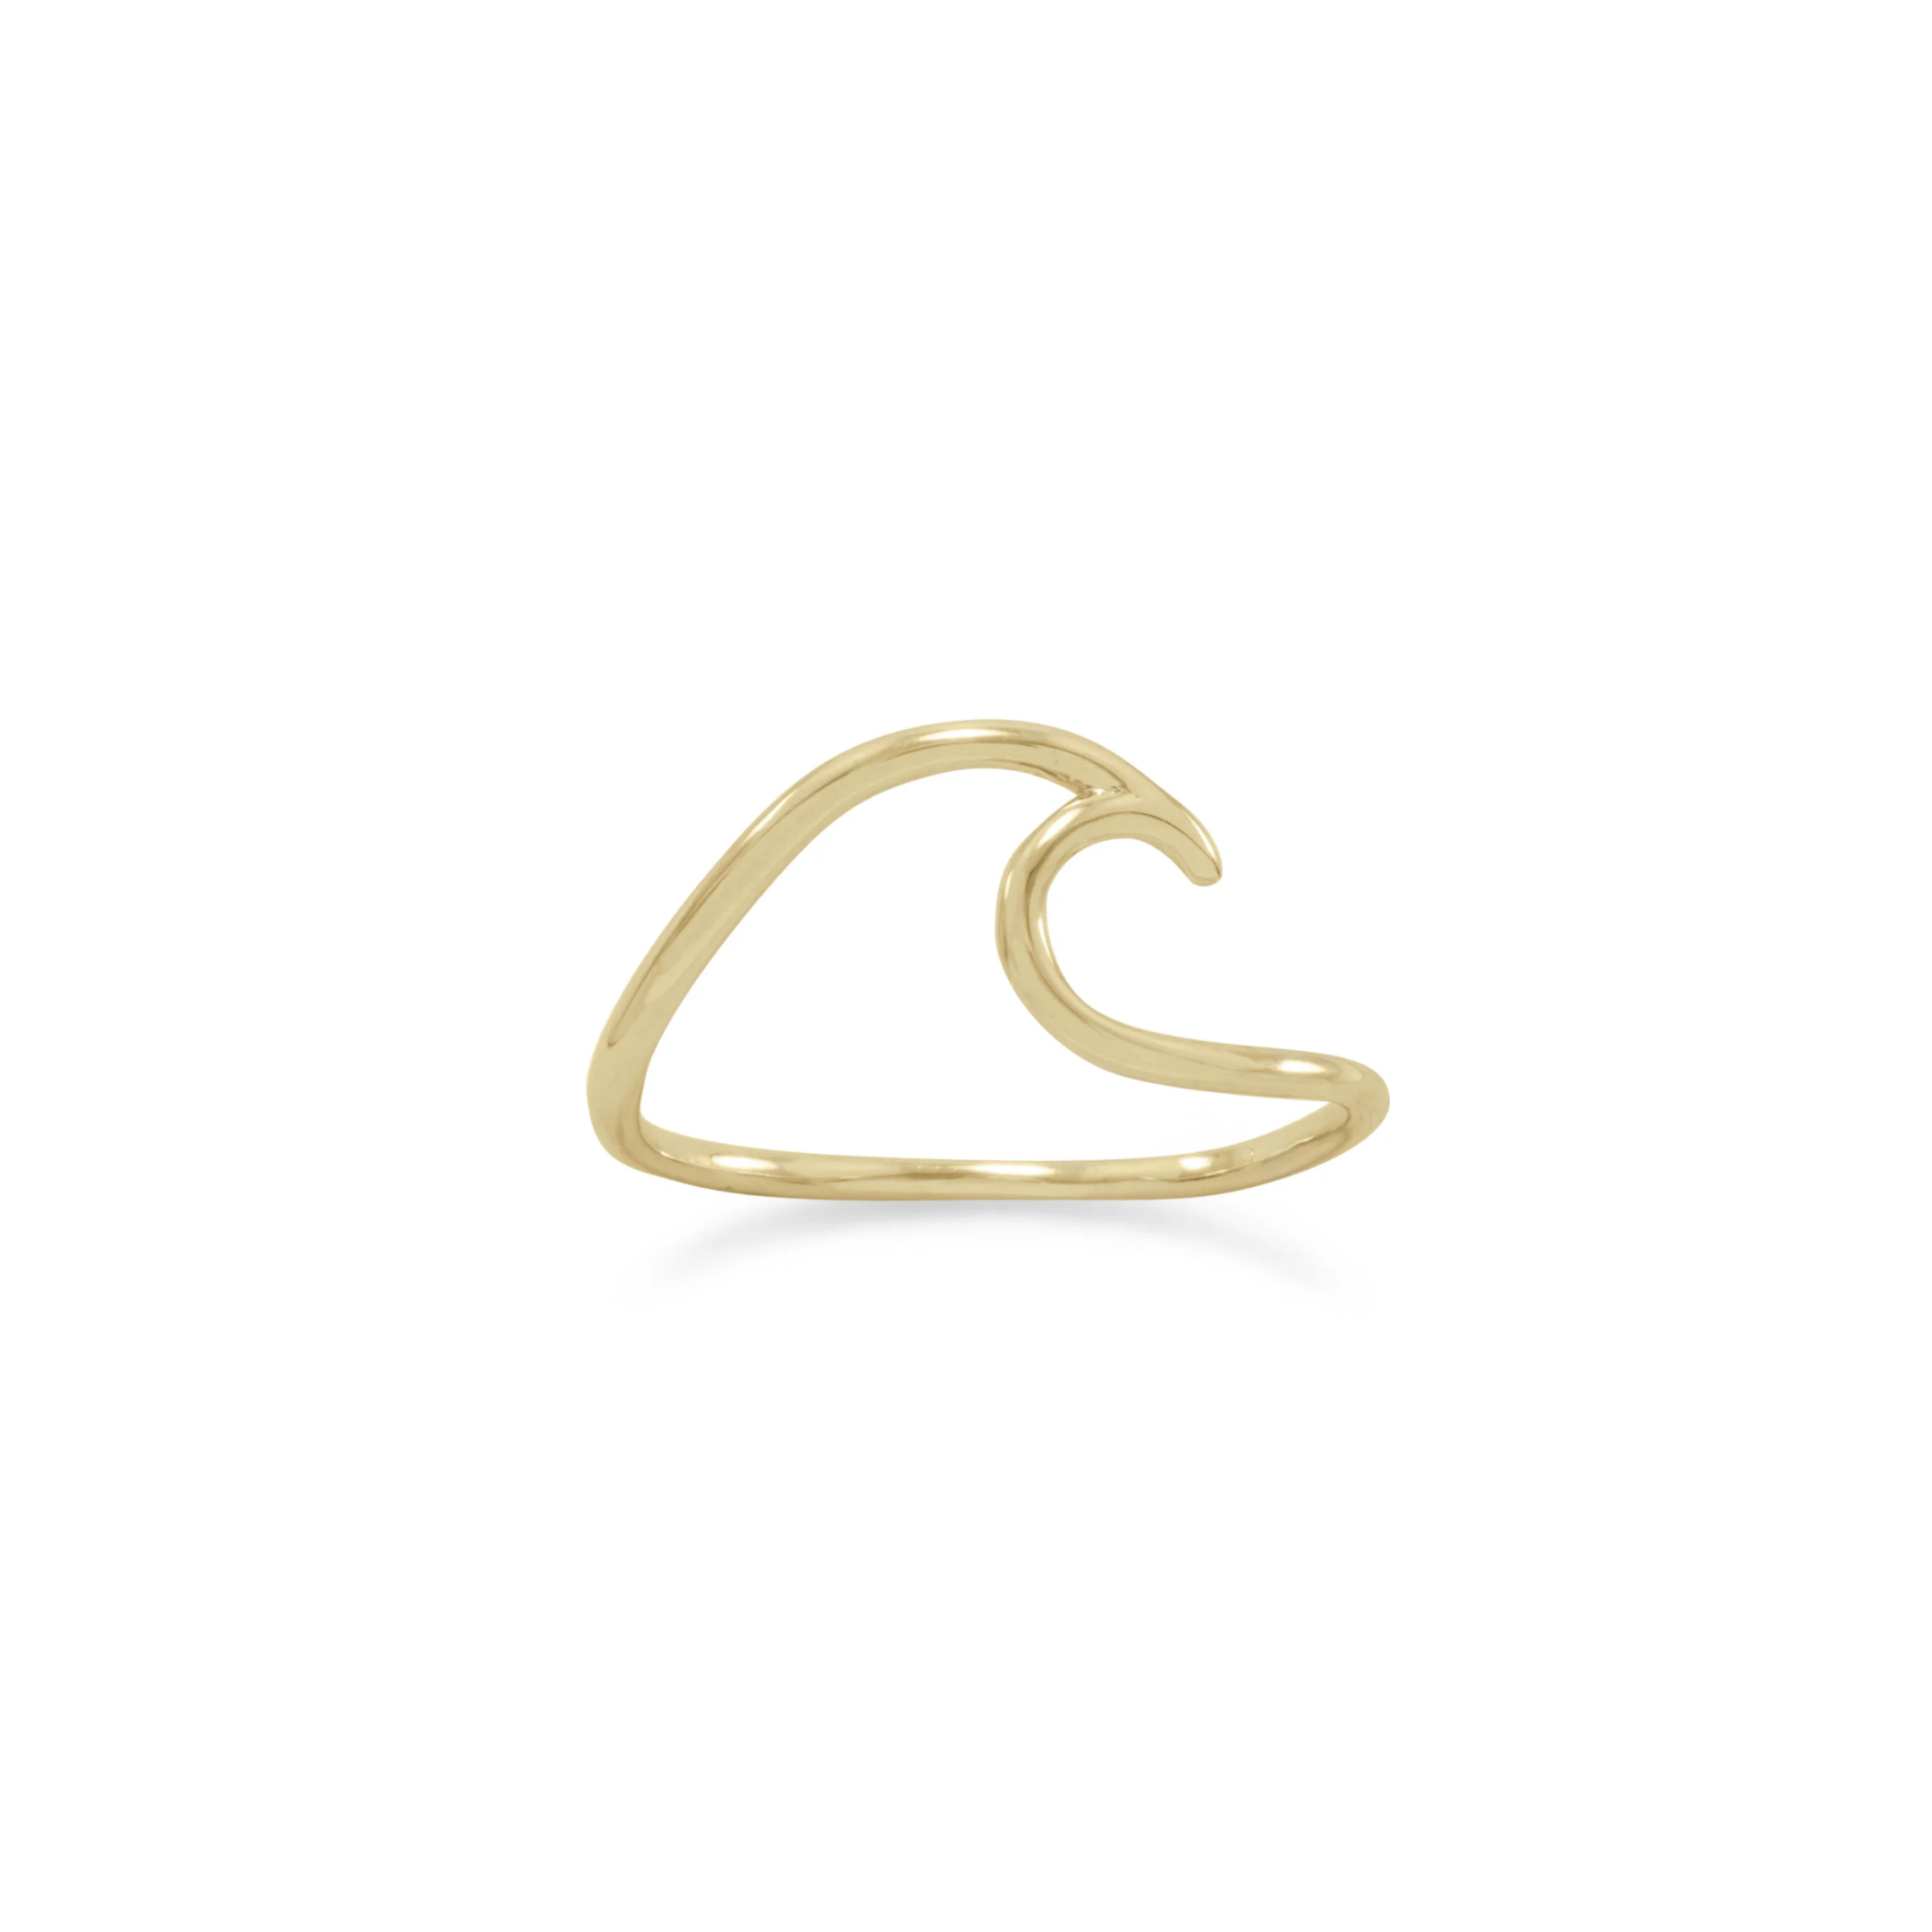 Wave of Fresh Air Ring in Gold or Sterling Silver